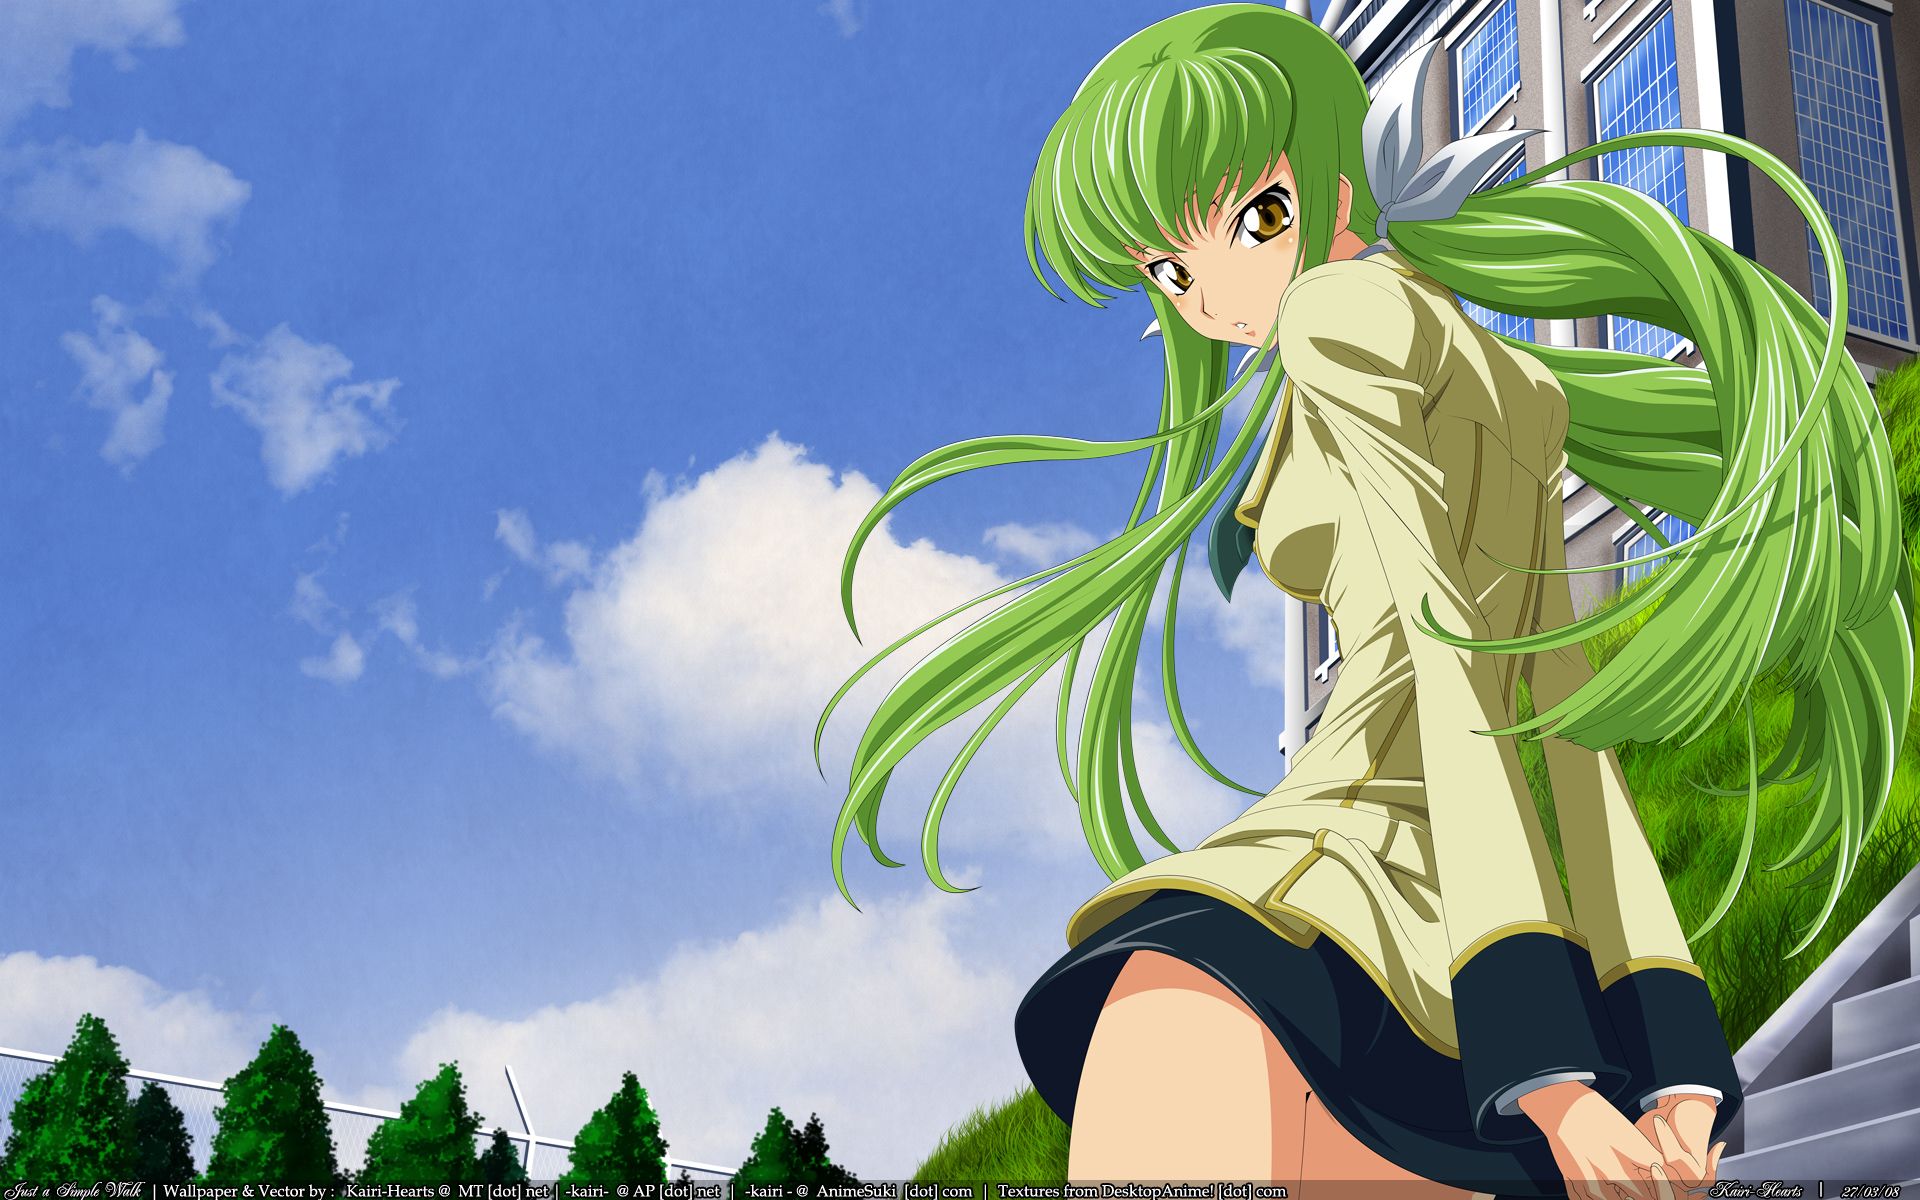 Download C.C. from Code Geass in a mesmerizing anime wallpaper Wallpaper